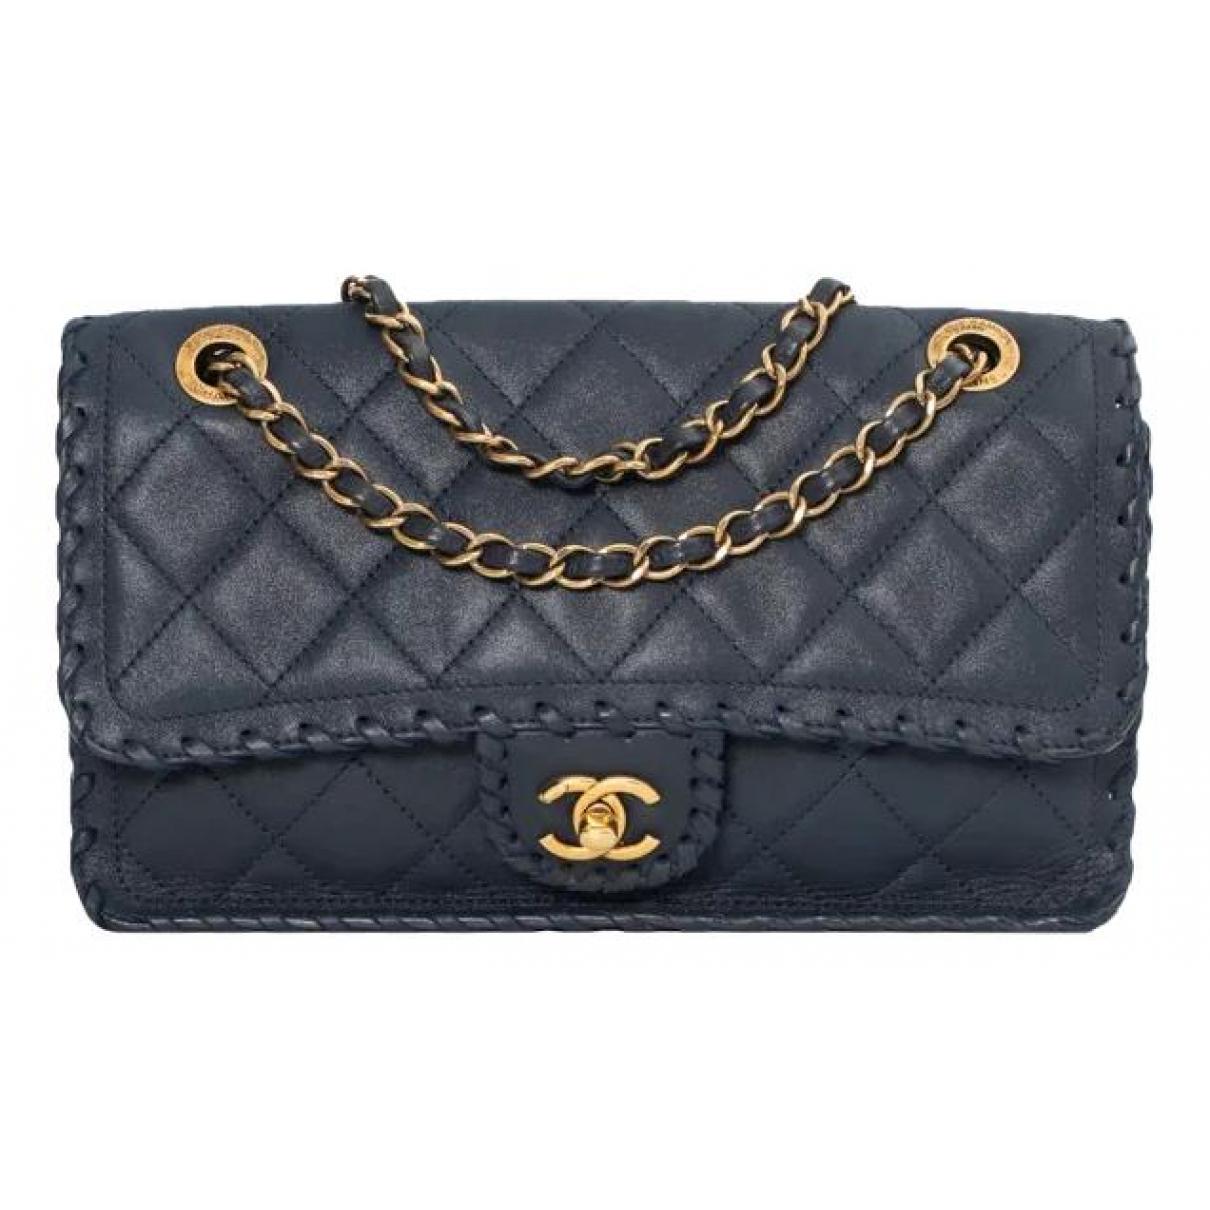 Timeless/classique leather handbag Chanel Blue in Leather - 17670291